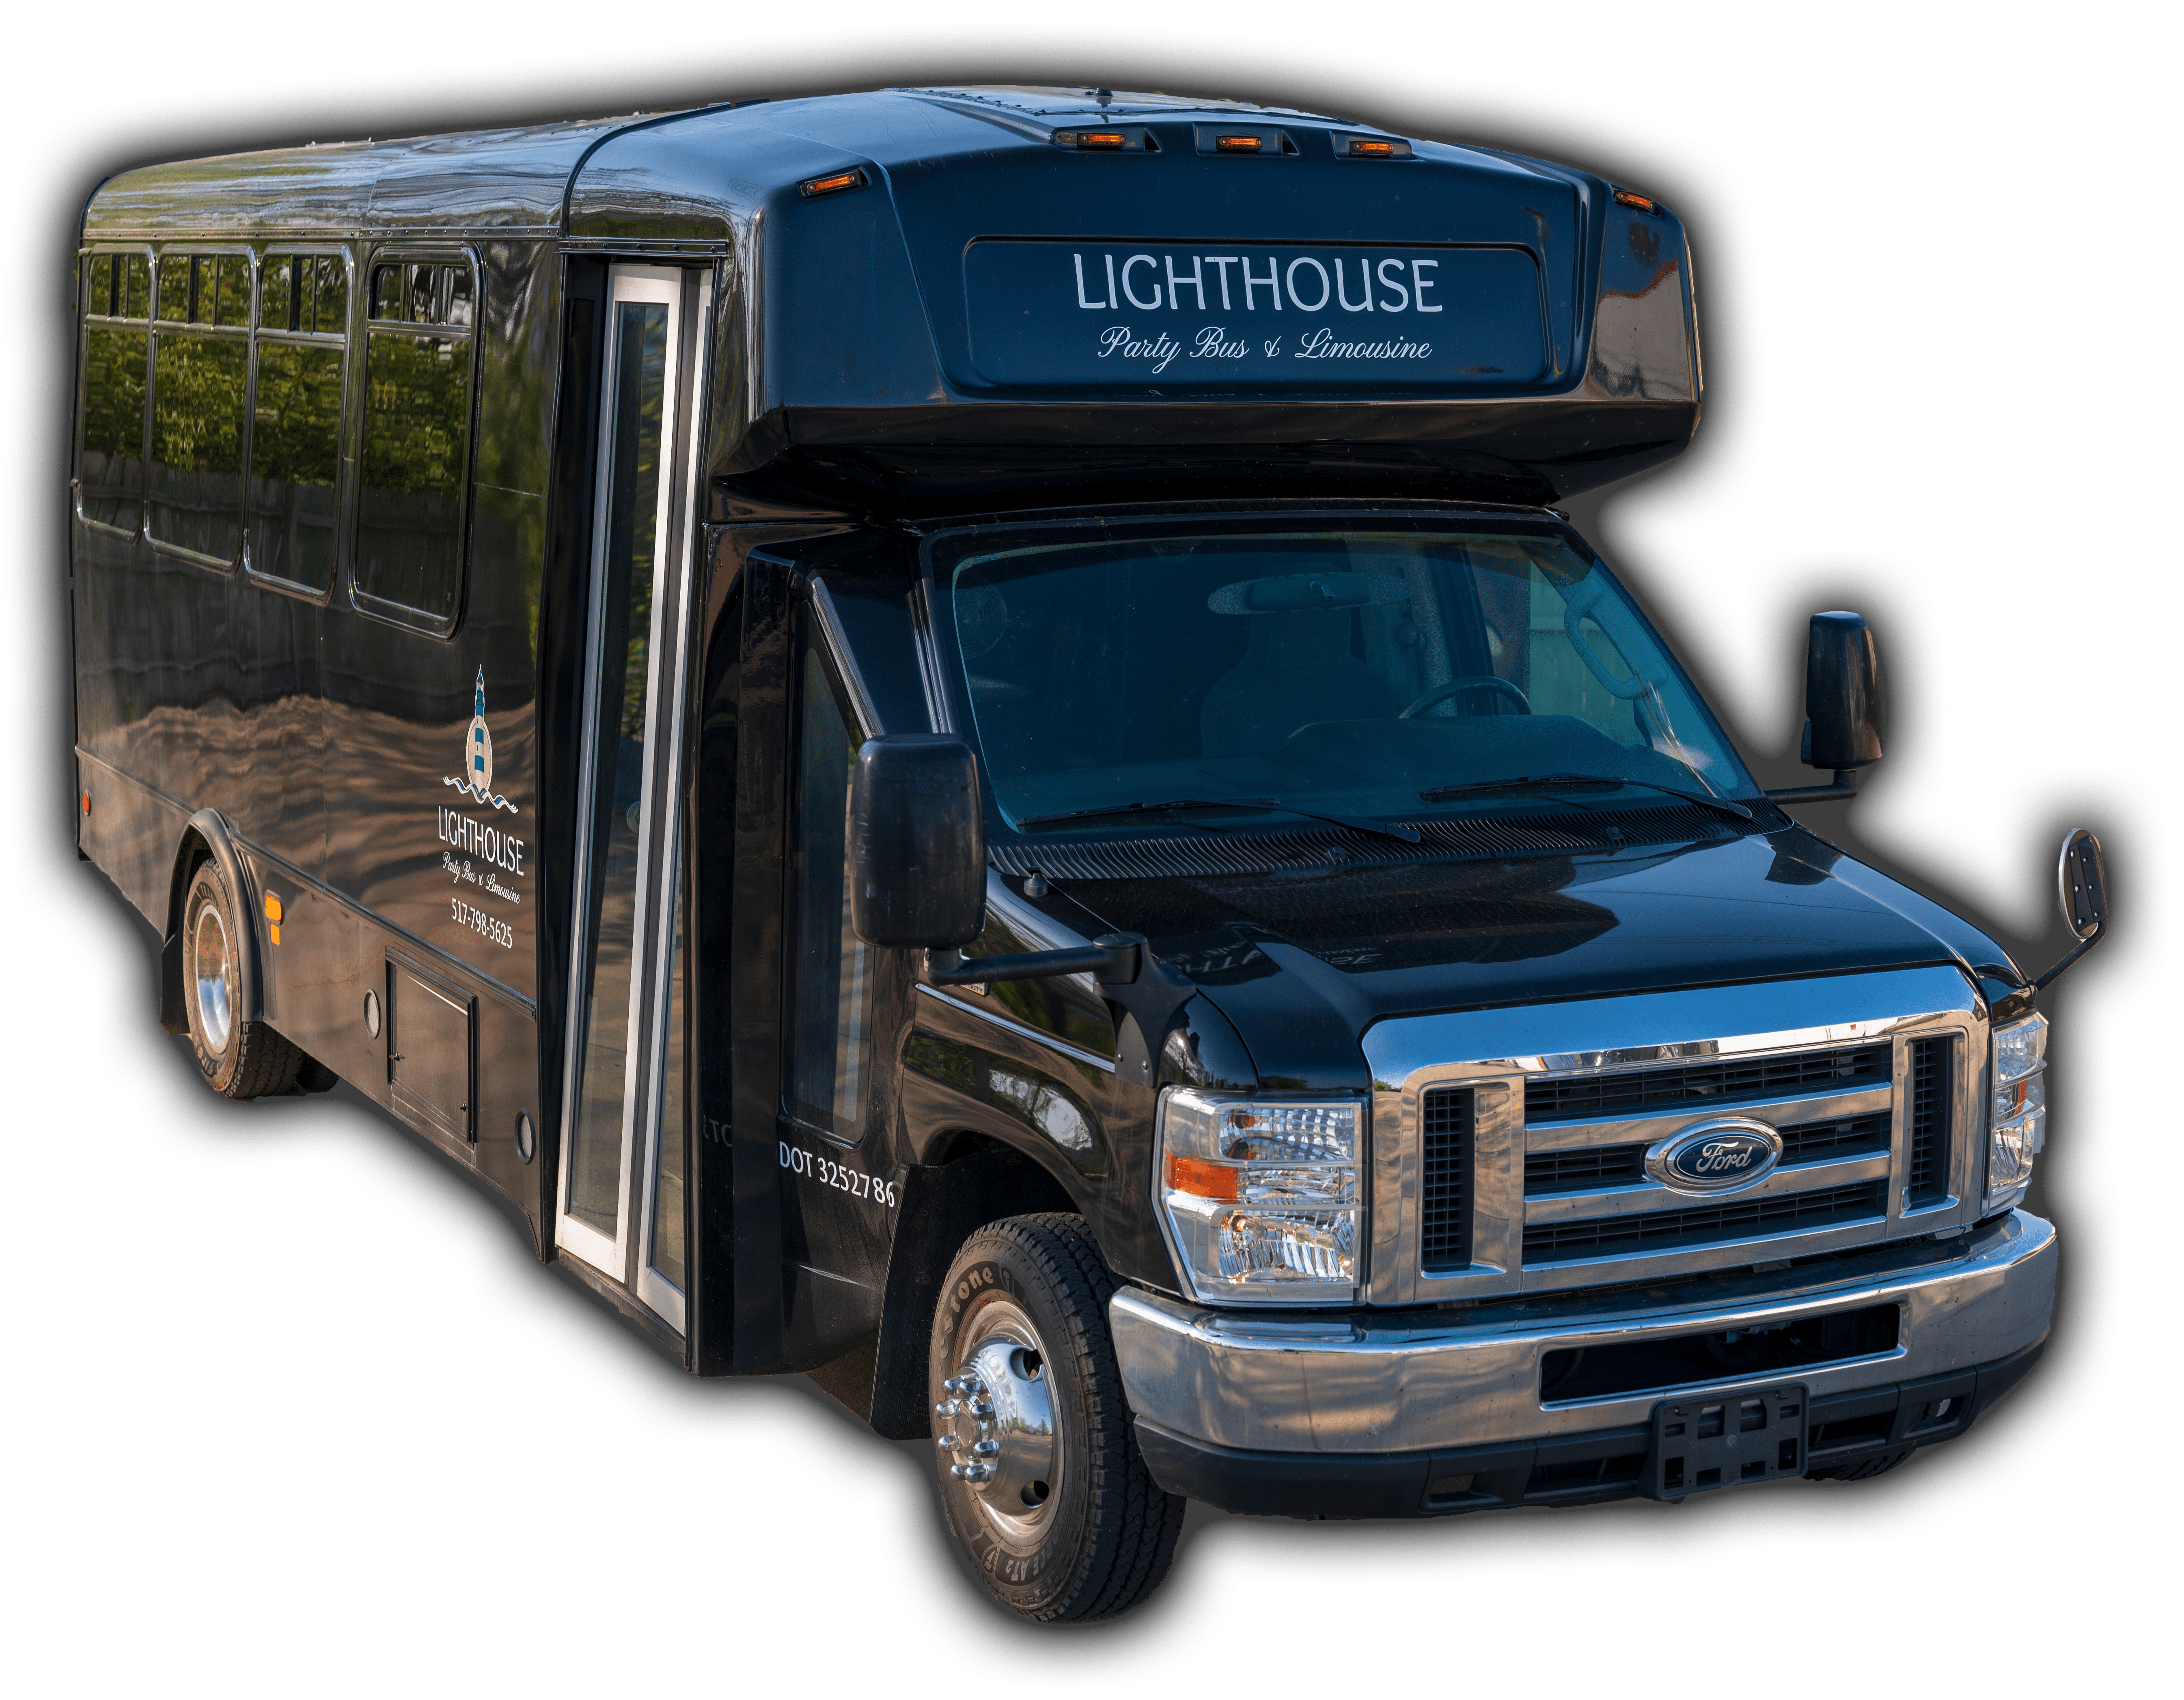 Belle Isle Limo Bus in Michigan - Lighthouse Limousine